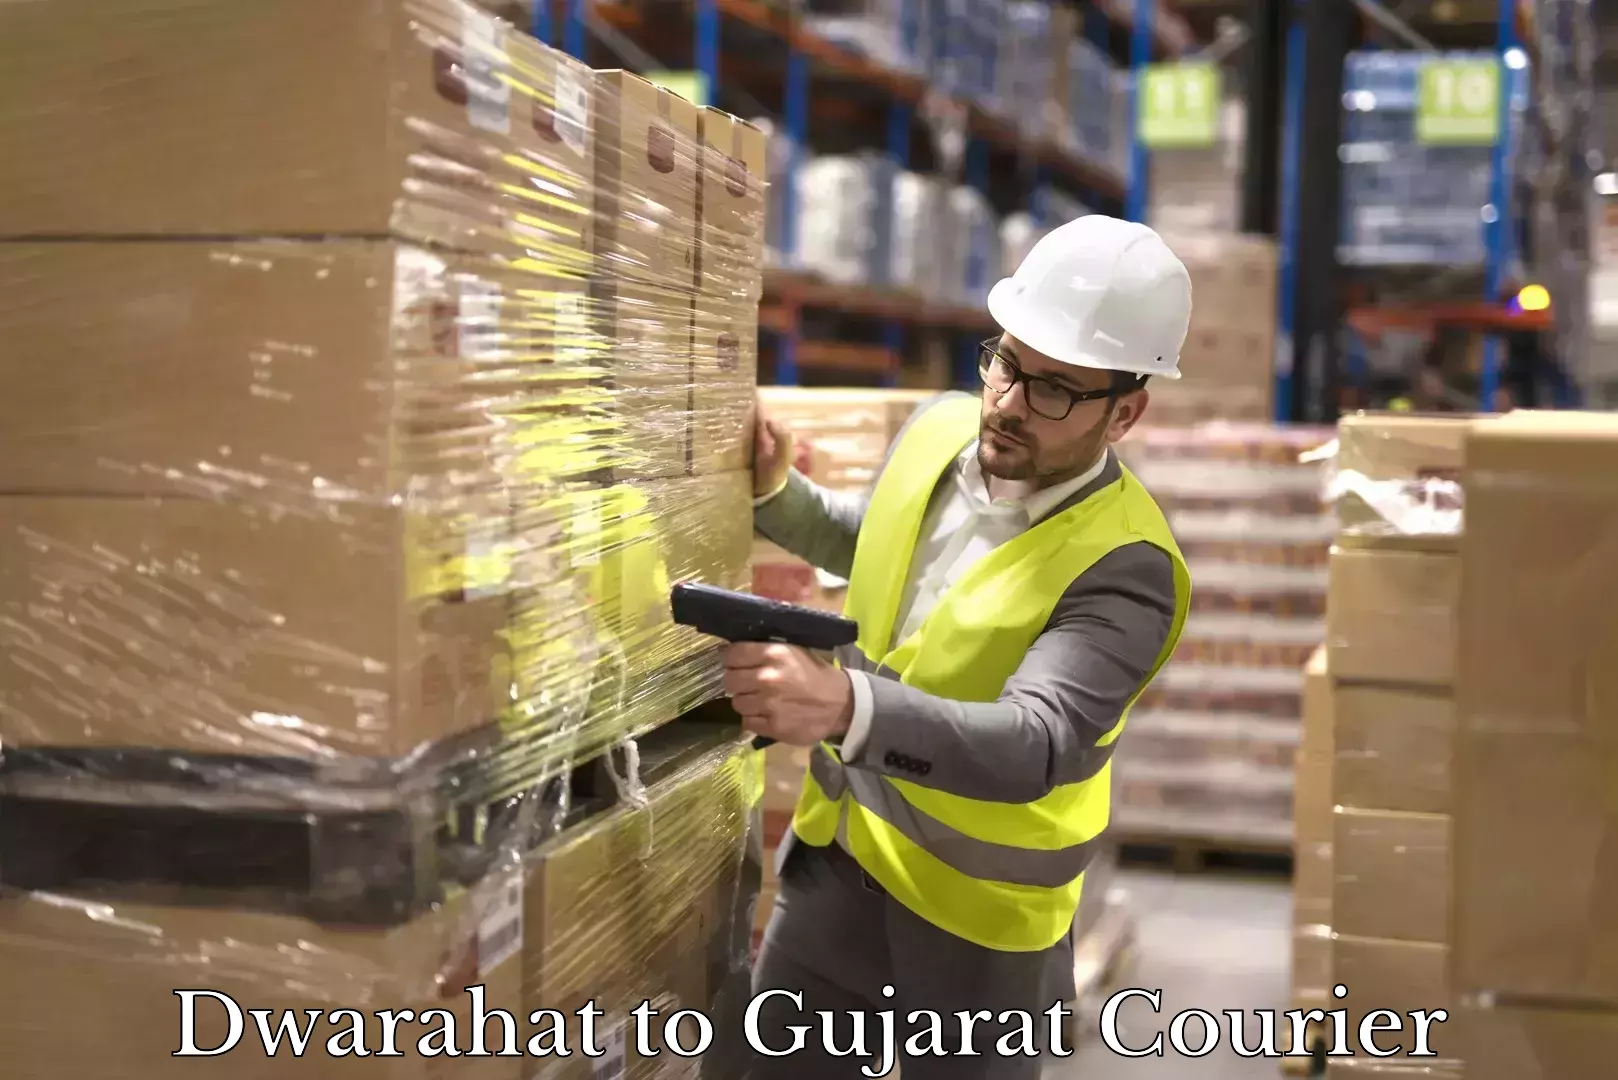 Business delivery service Dwarahat to Gujarat